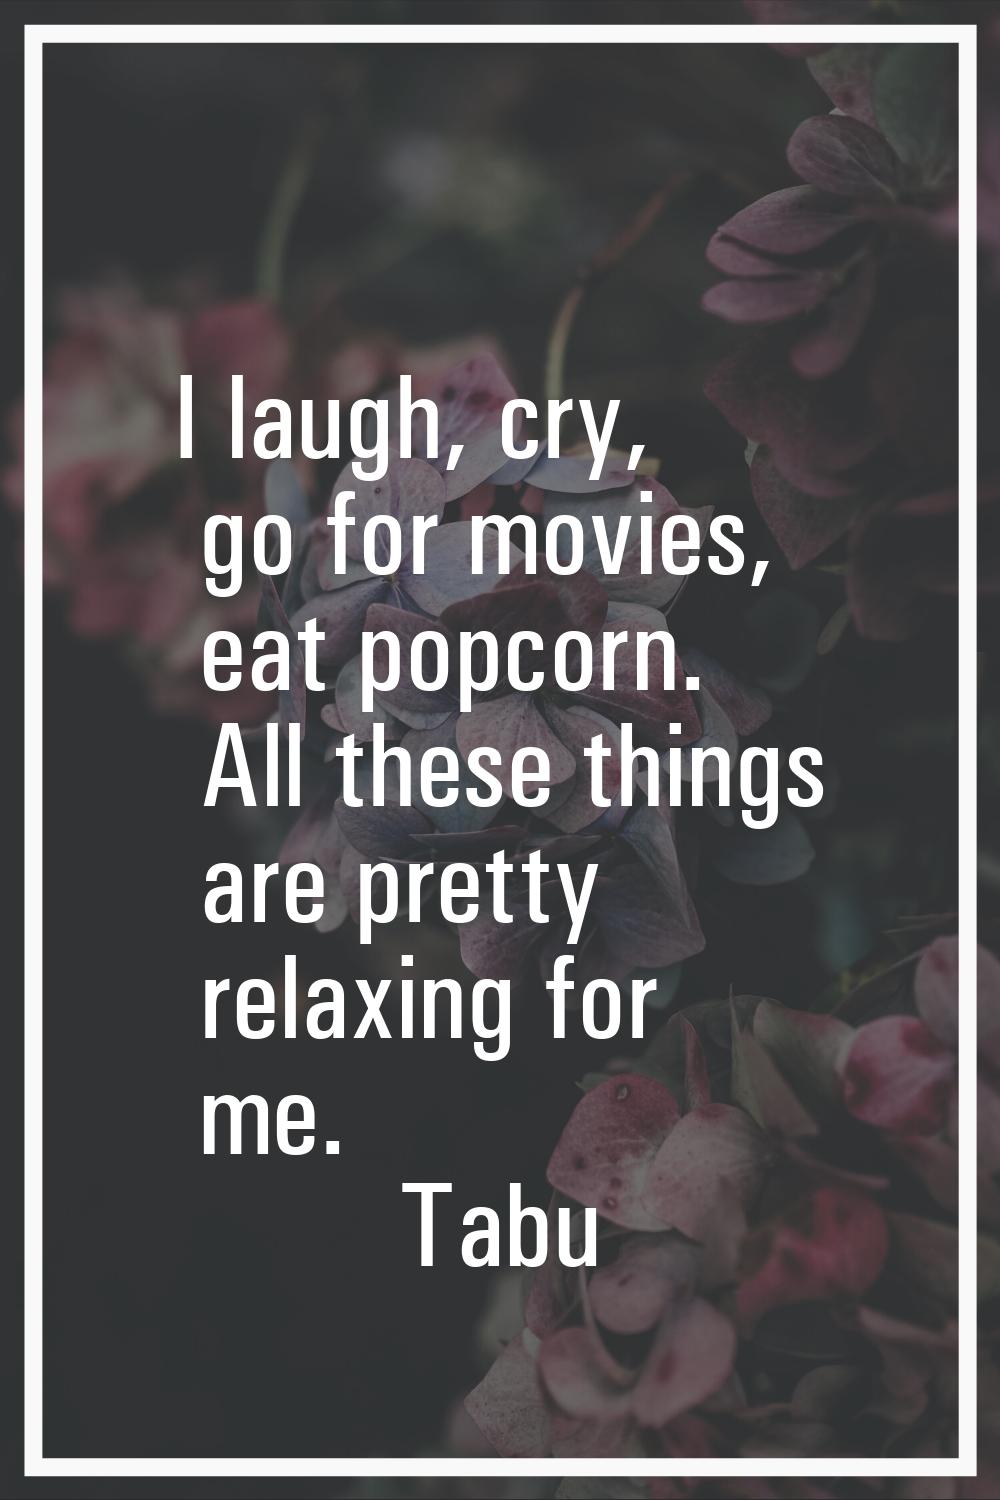 I laugh, cry, go for movies, eat popcorn. All these things are pretty relaxing for me.